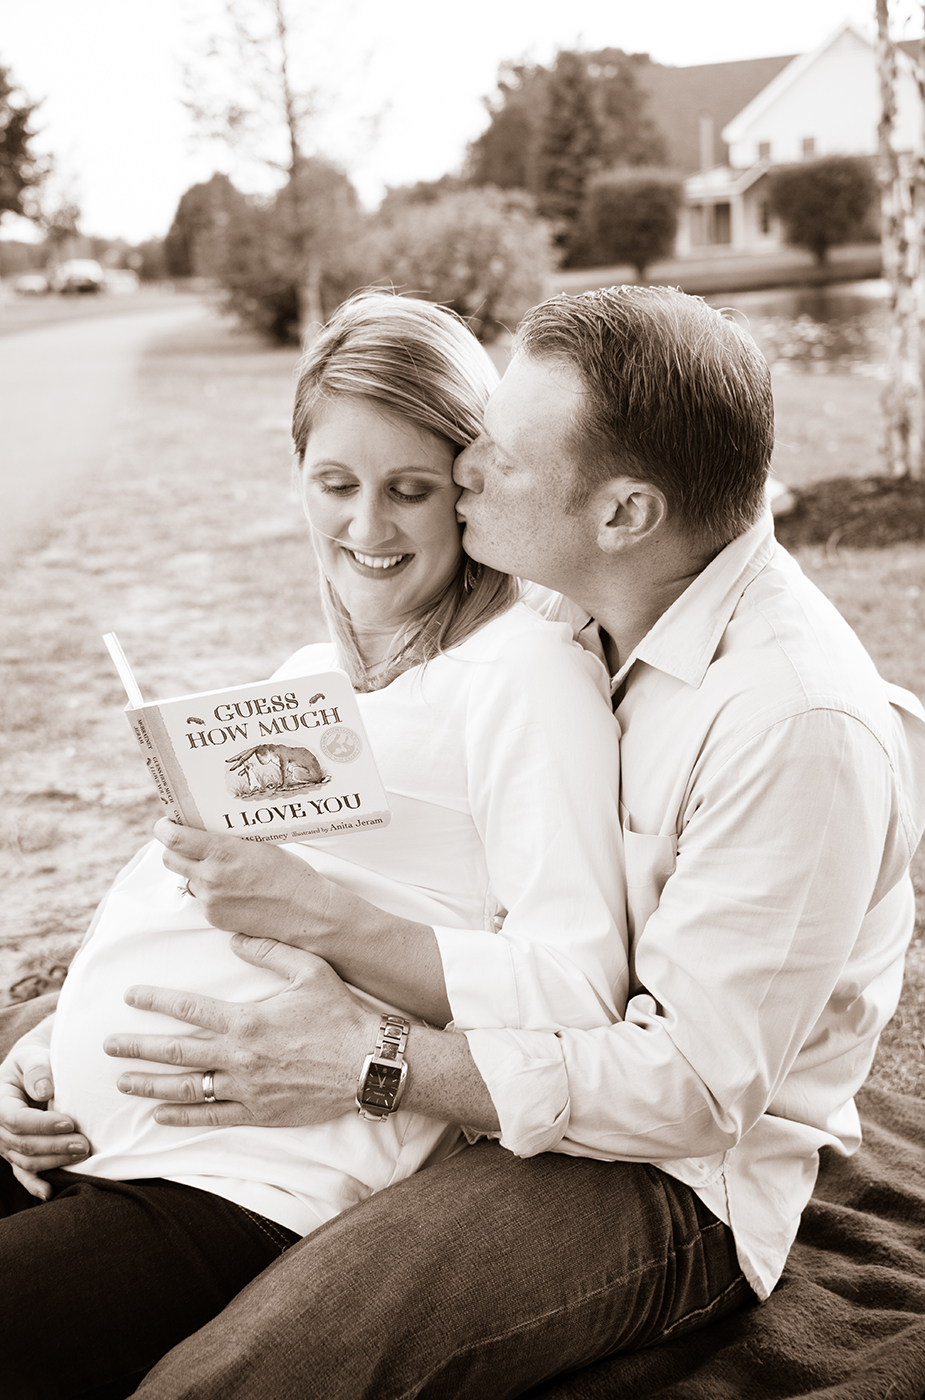 All Occasions Photography Albany NY - Maternity Photography Reading Book